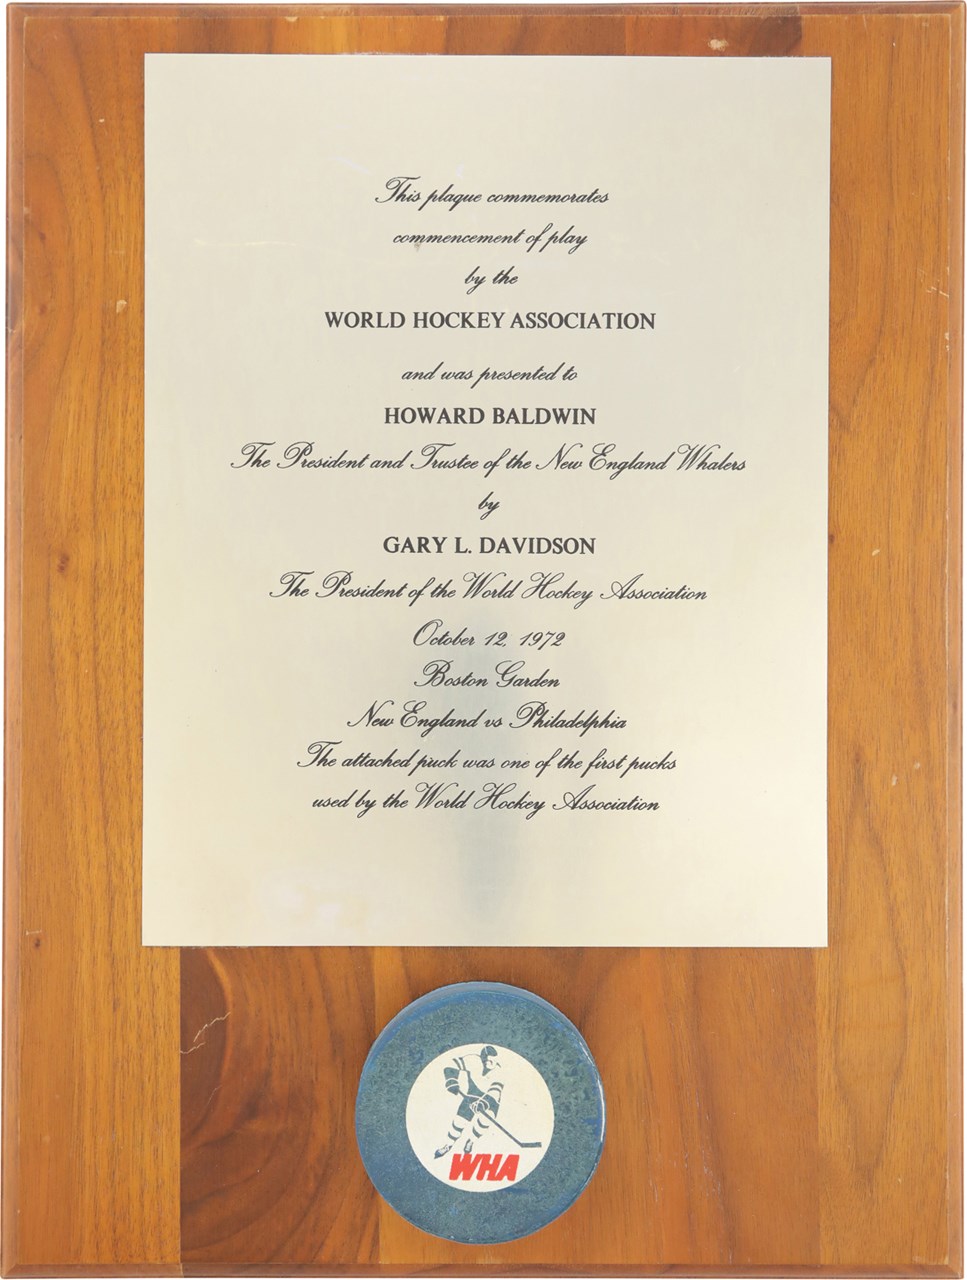 10/12/72 WHA Commencement of Play Award